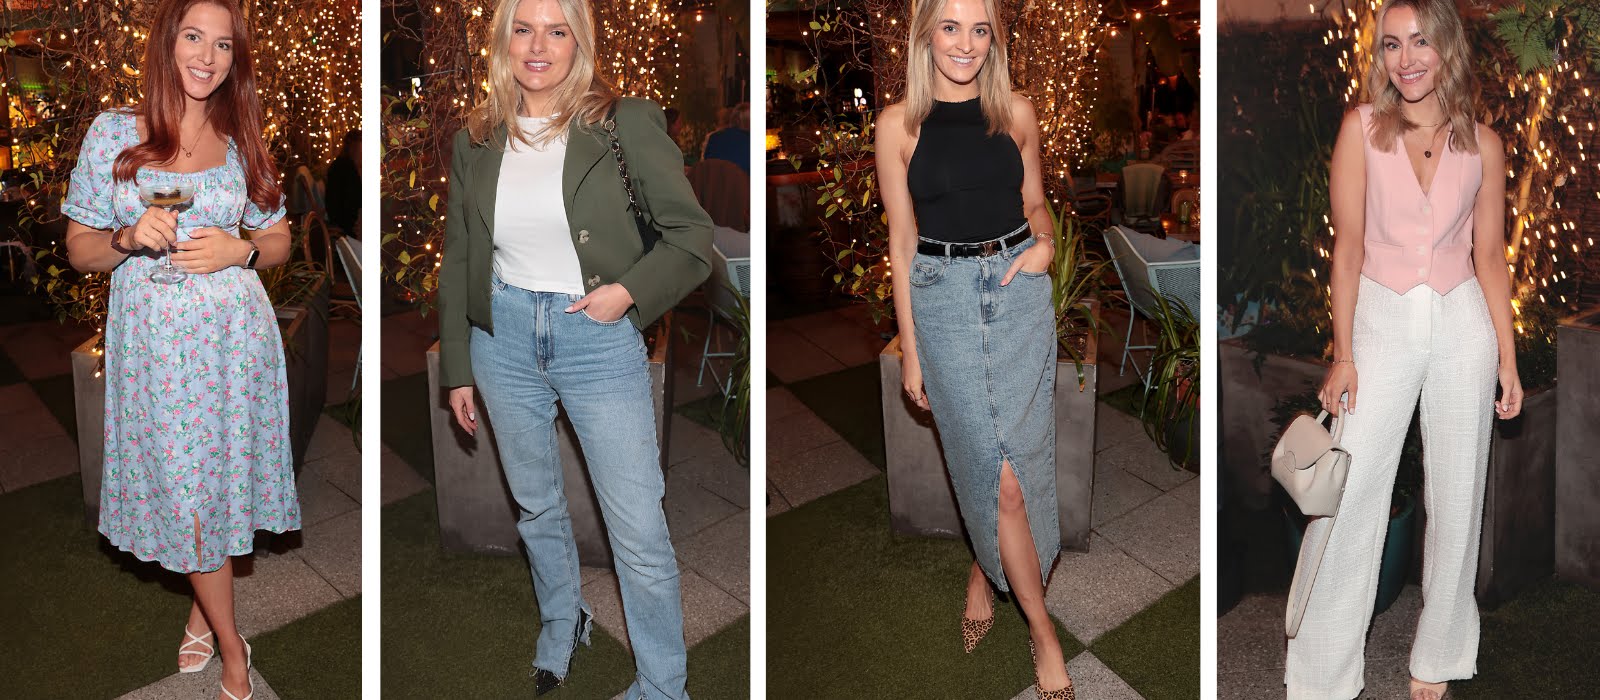 Social Pictures: The launch of House Dublin’s ‘Cocktails at Home’ range